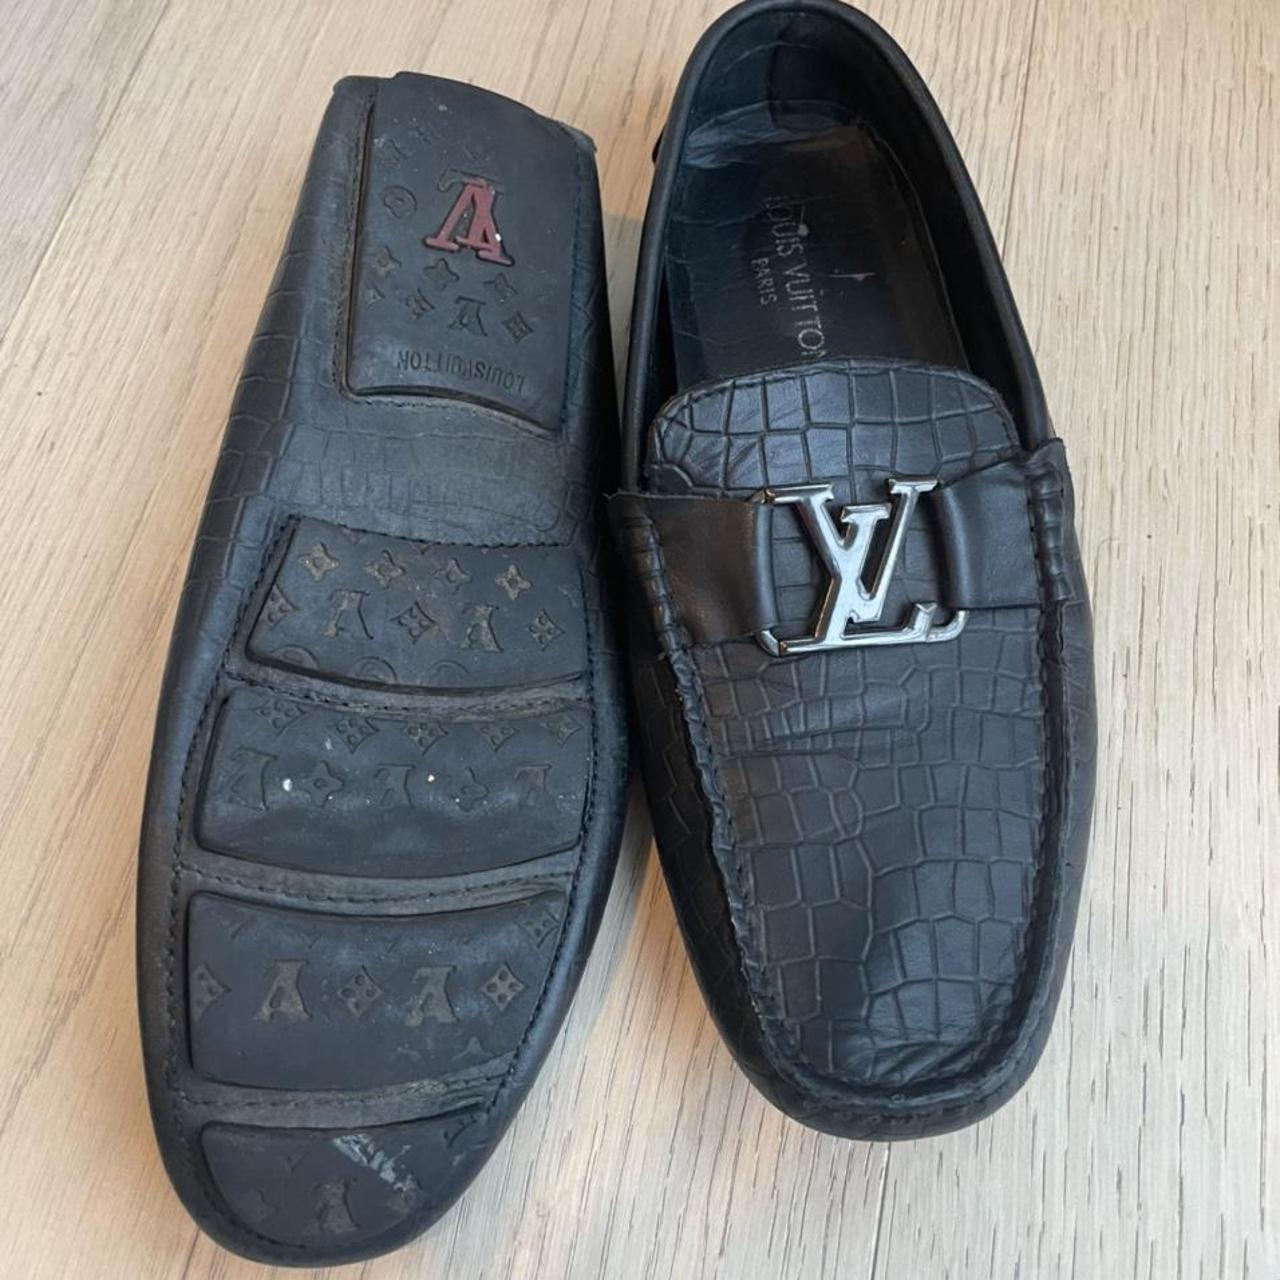 New Louis Vuitton men's loafers size 9 1/2 basically - Depop